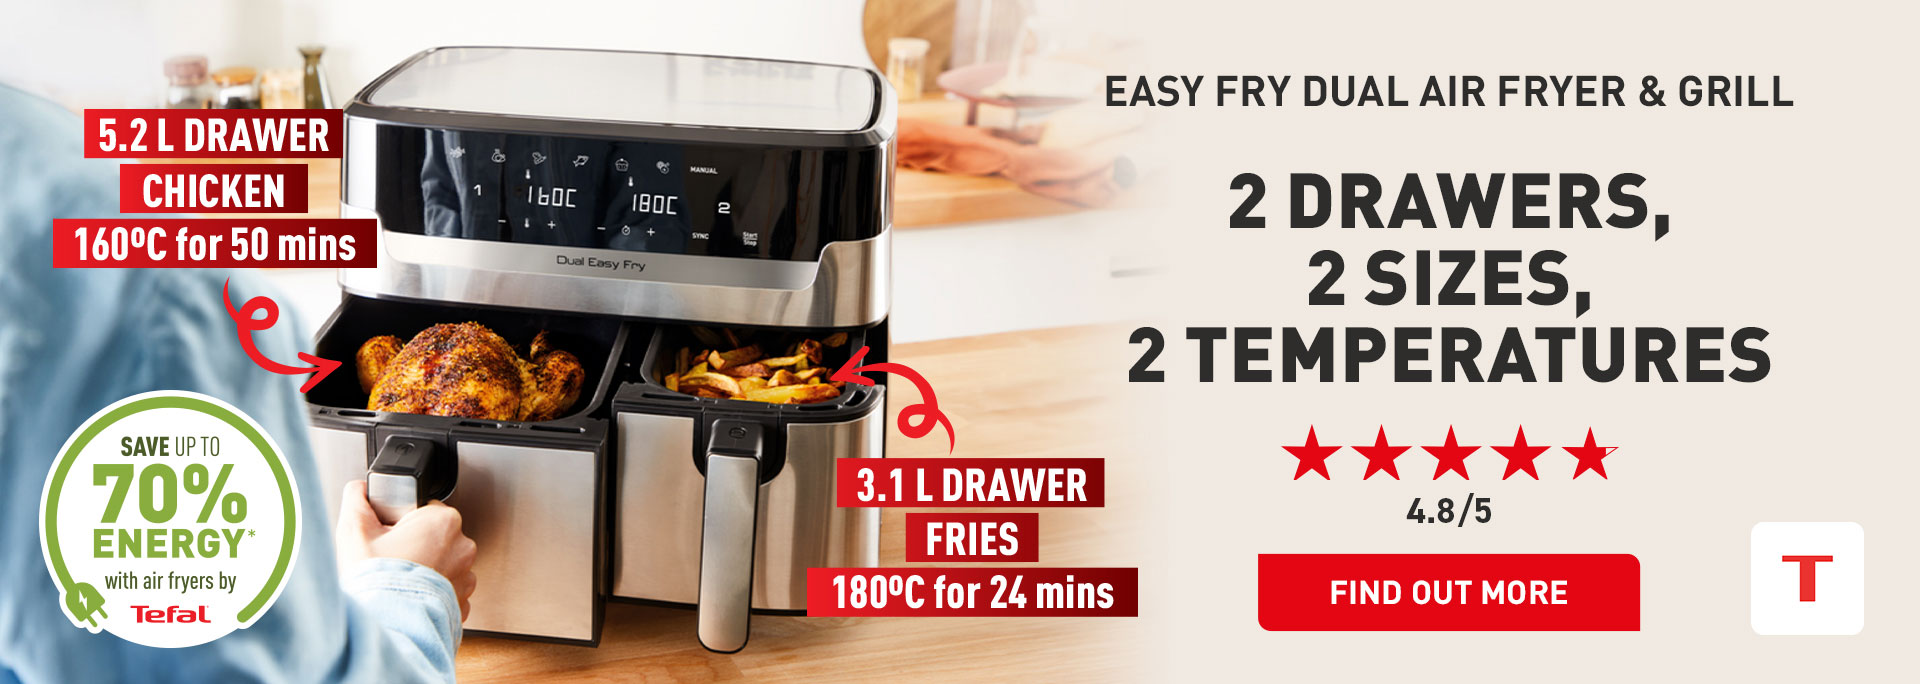 EasyFry Dual air fryer and grill - 2 drawers, 2 sizes, 2 temperatures - Find out more